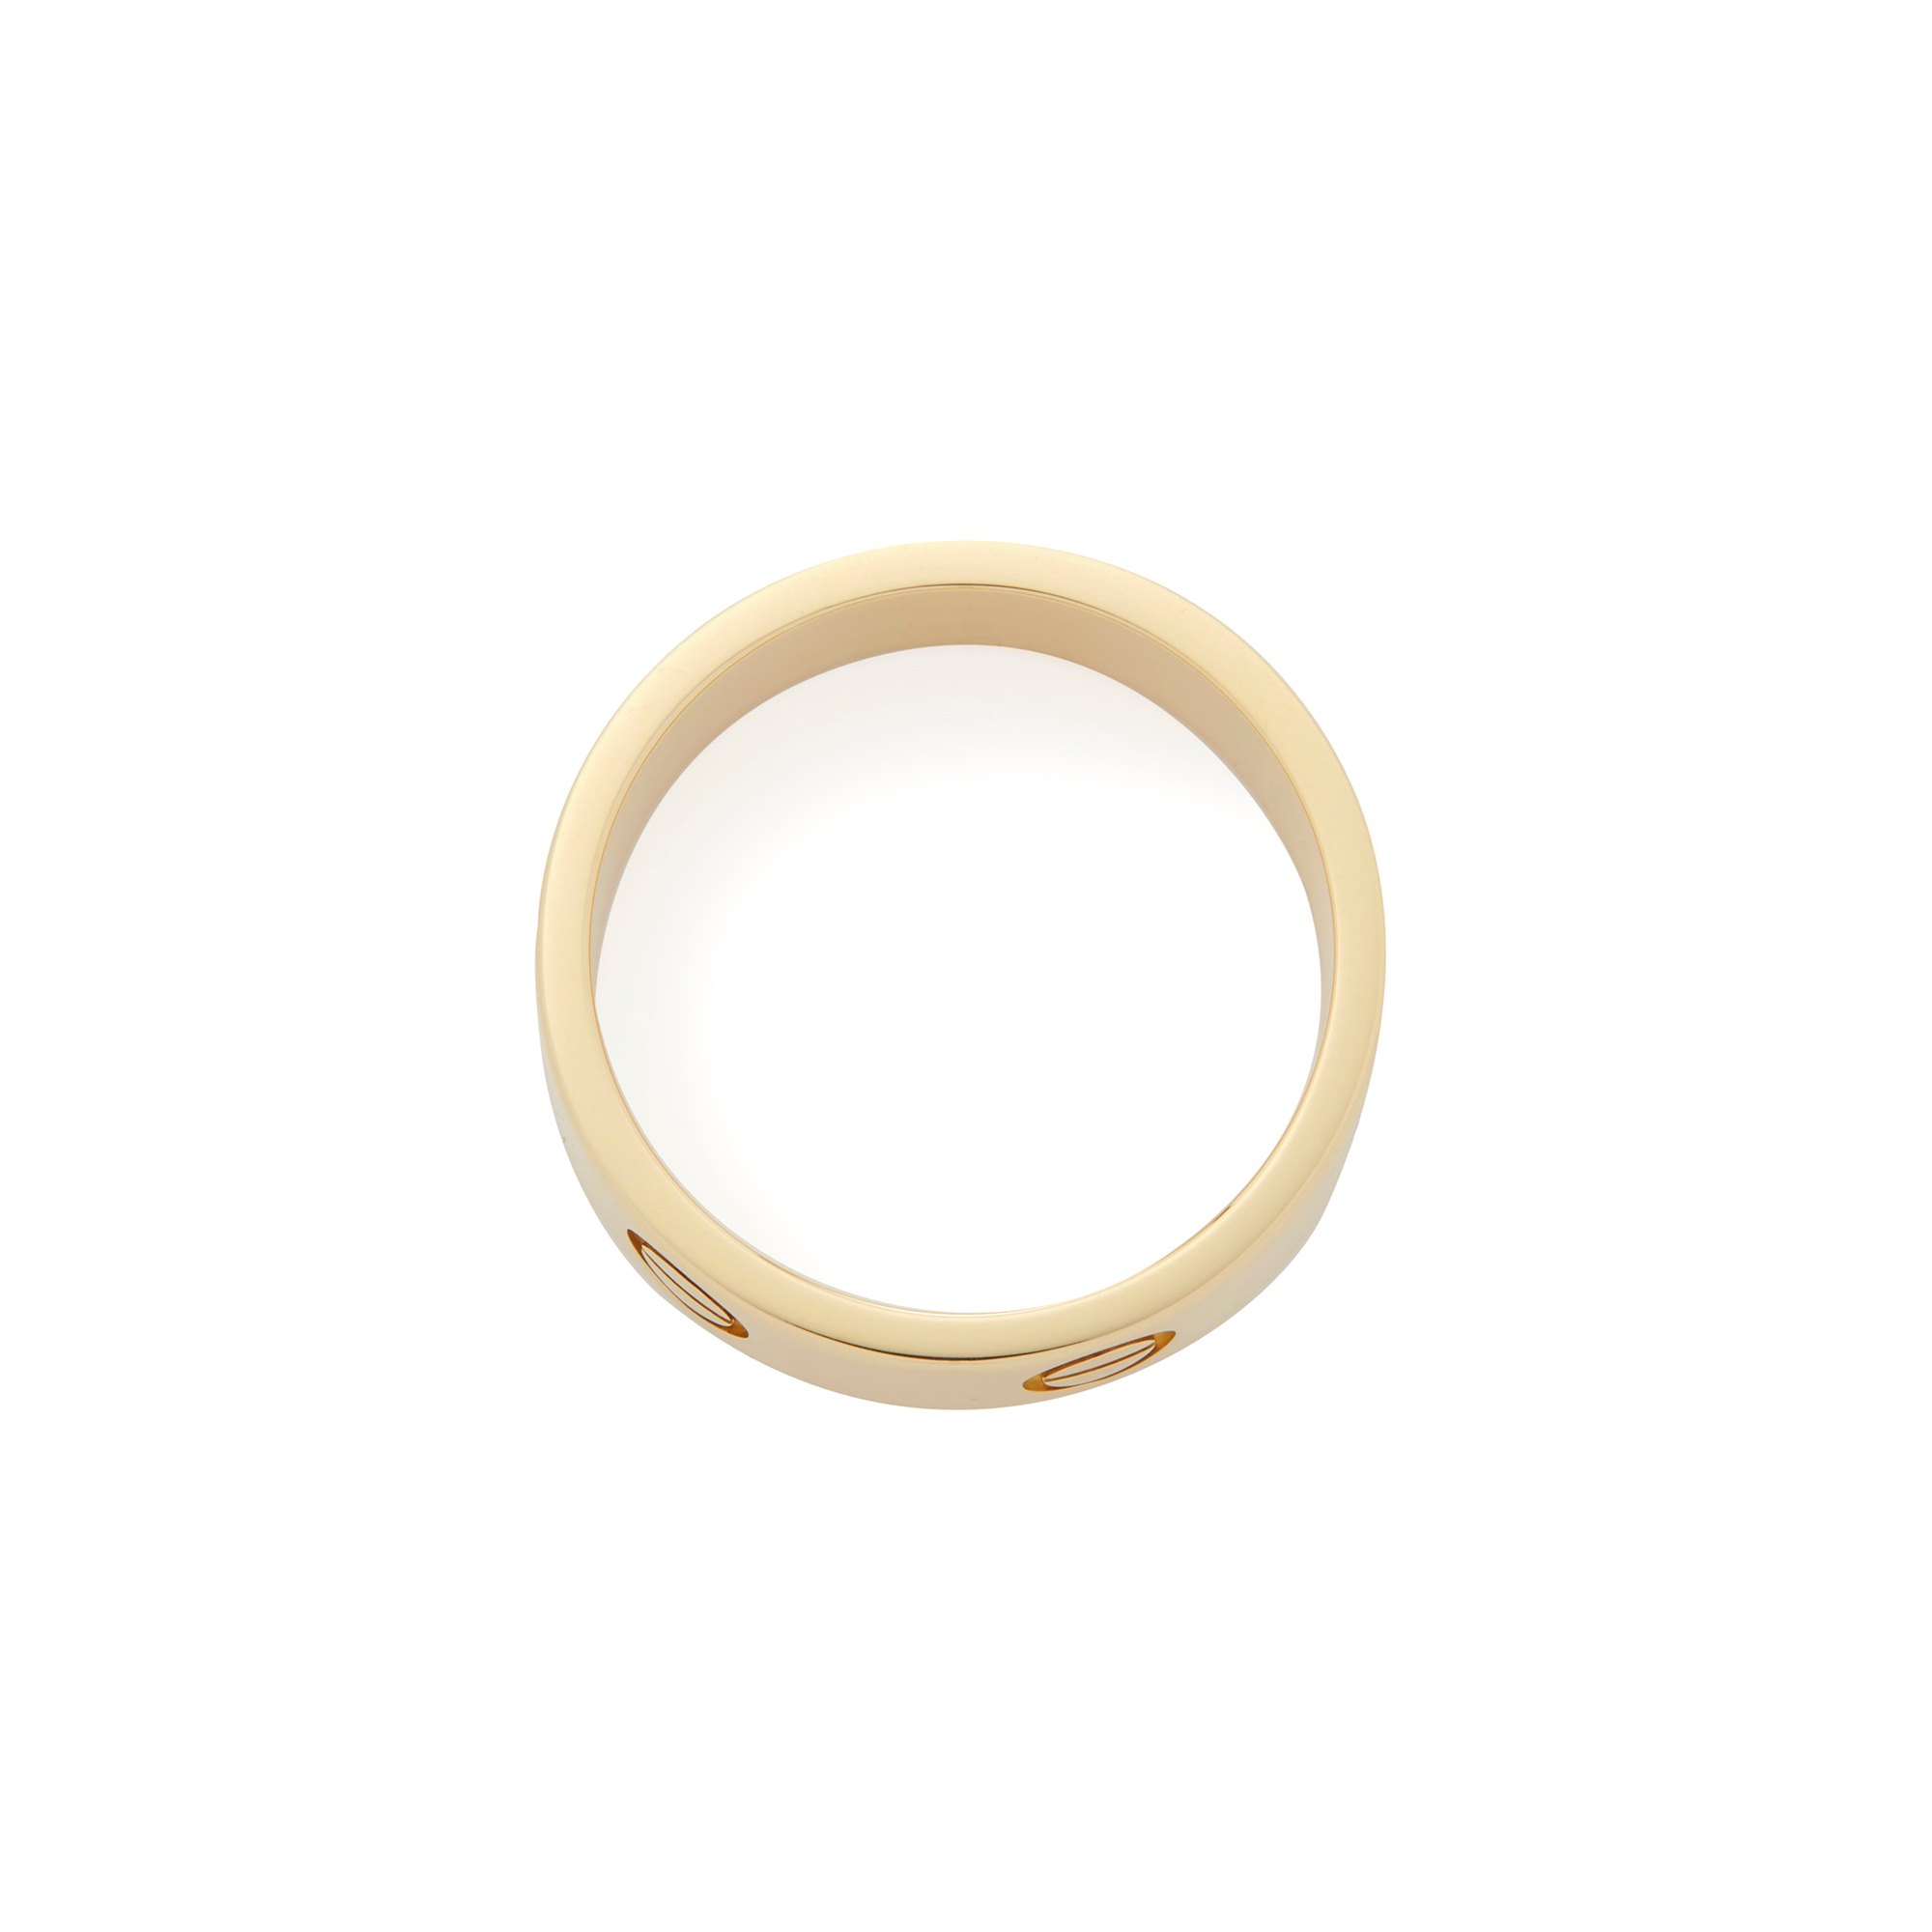 Cartier 18k Yellow Gold Love Ring